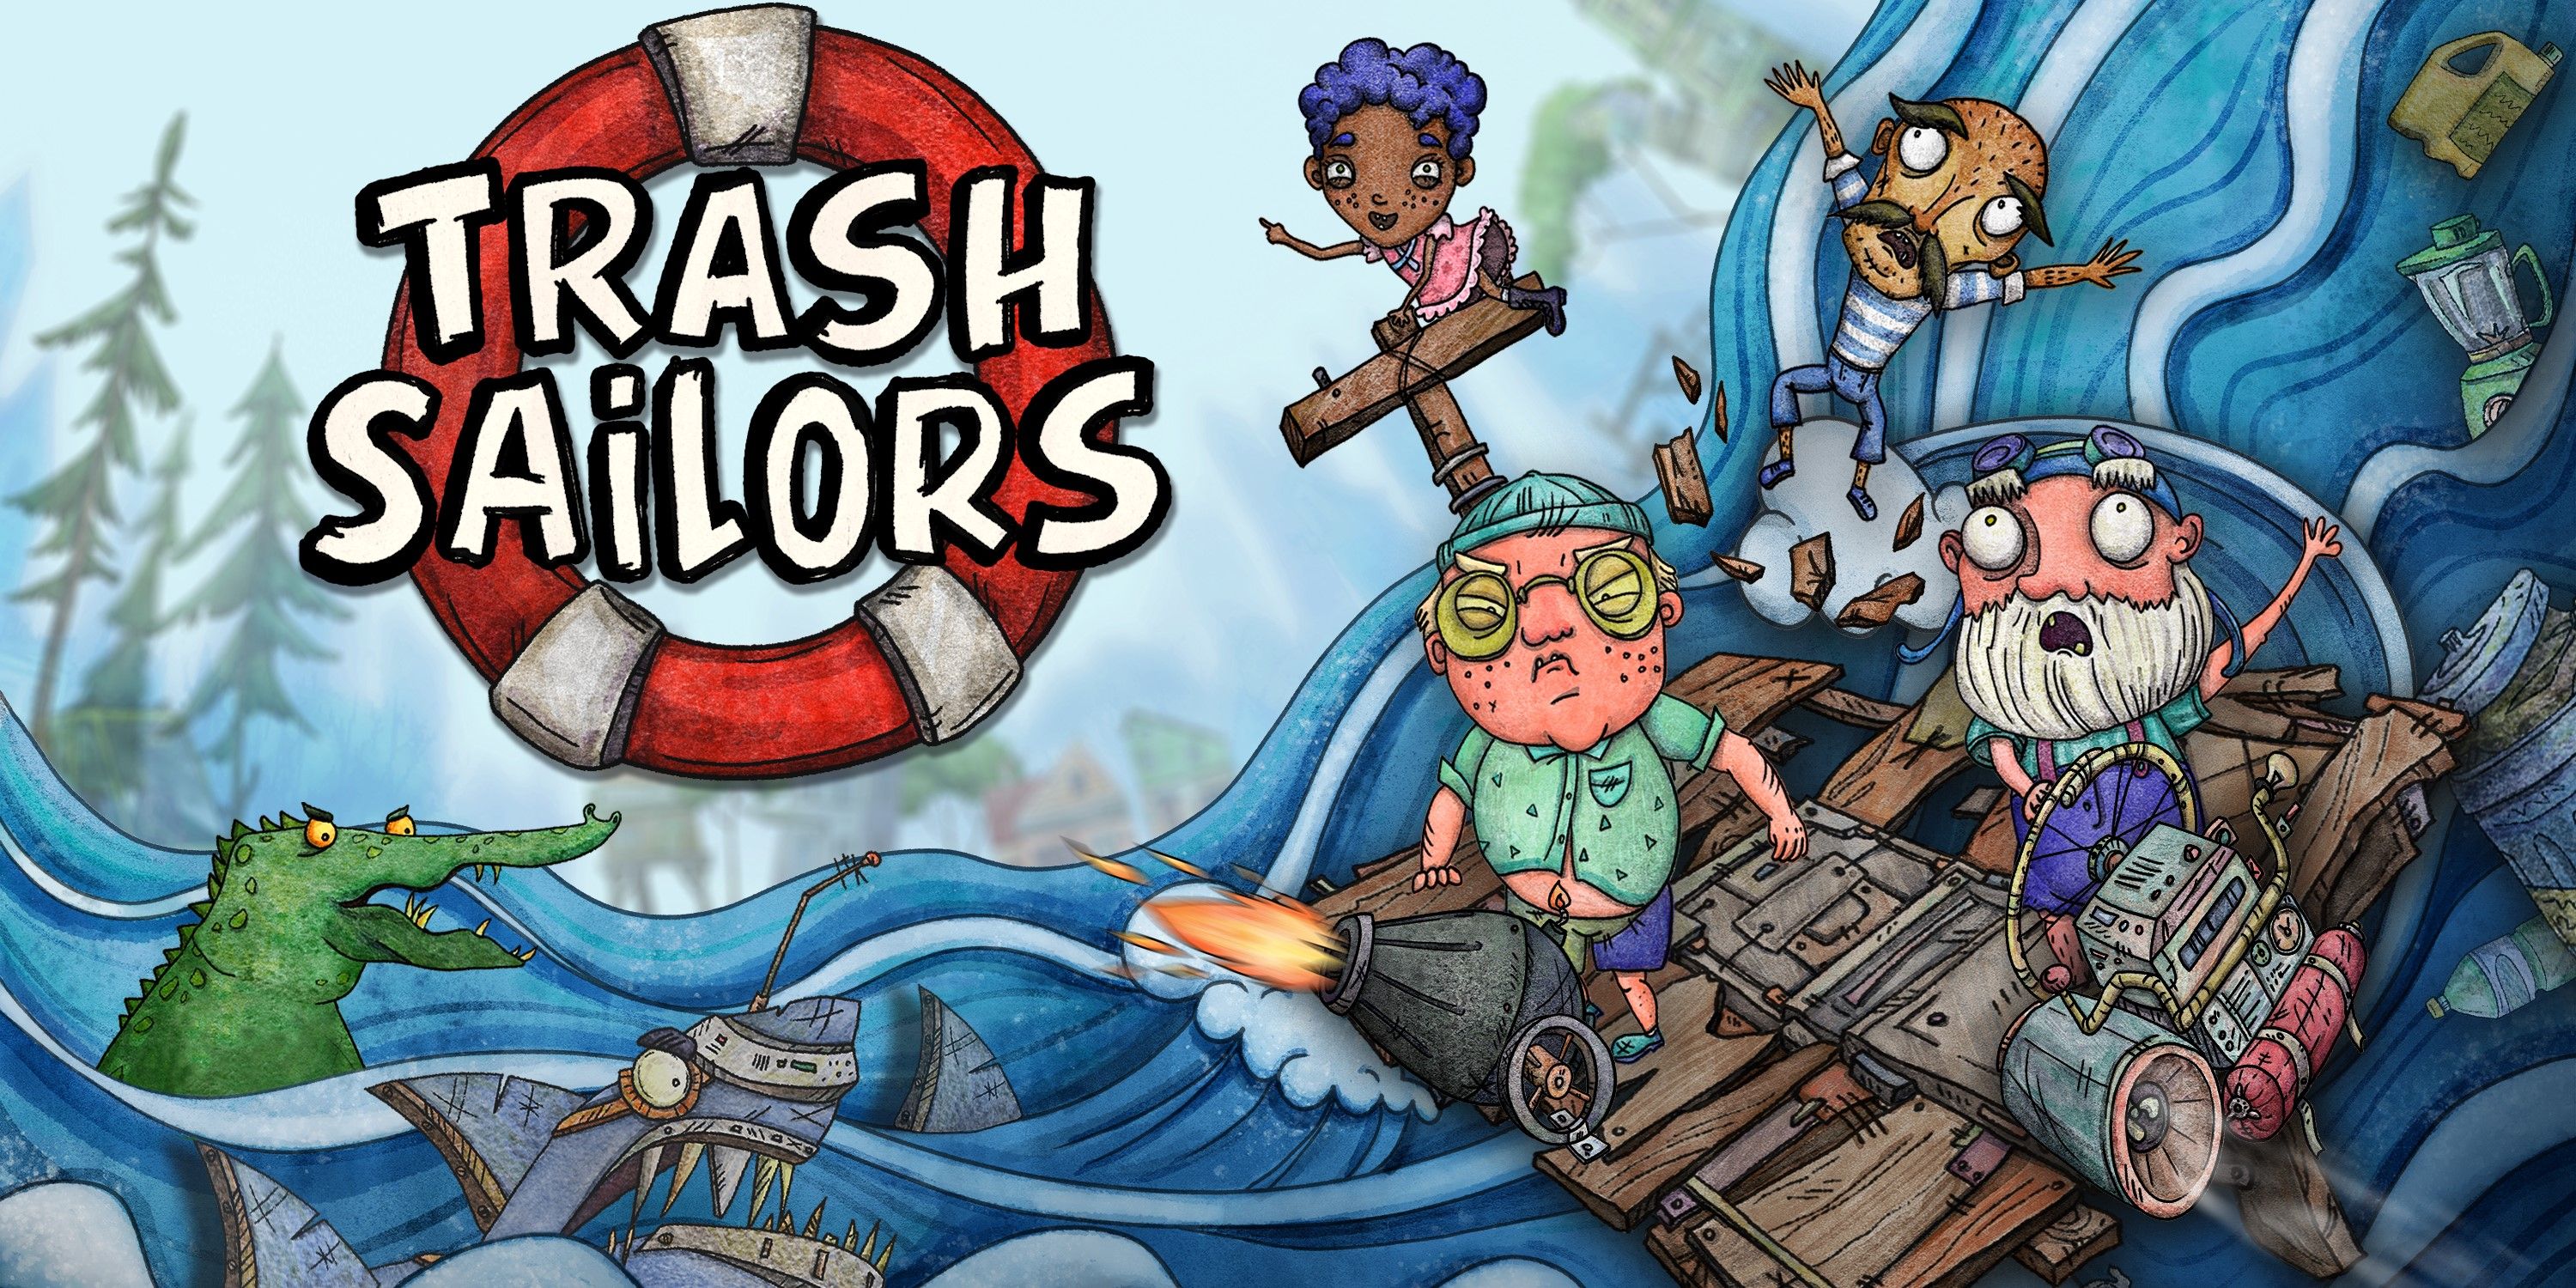 The title image for Trash Sailors.